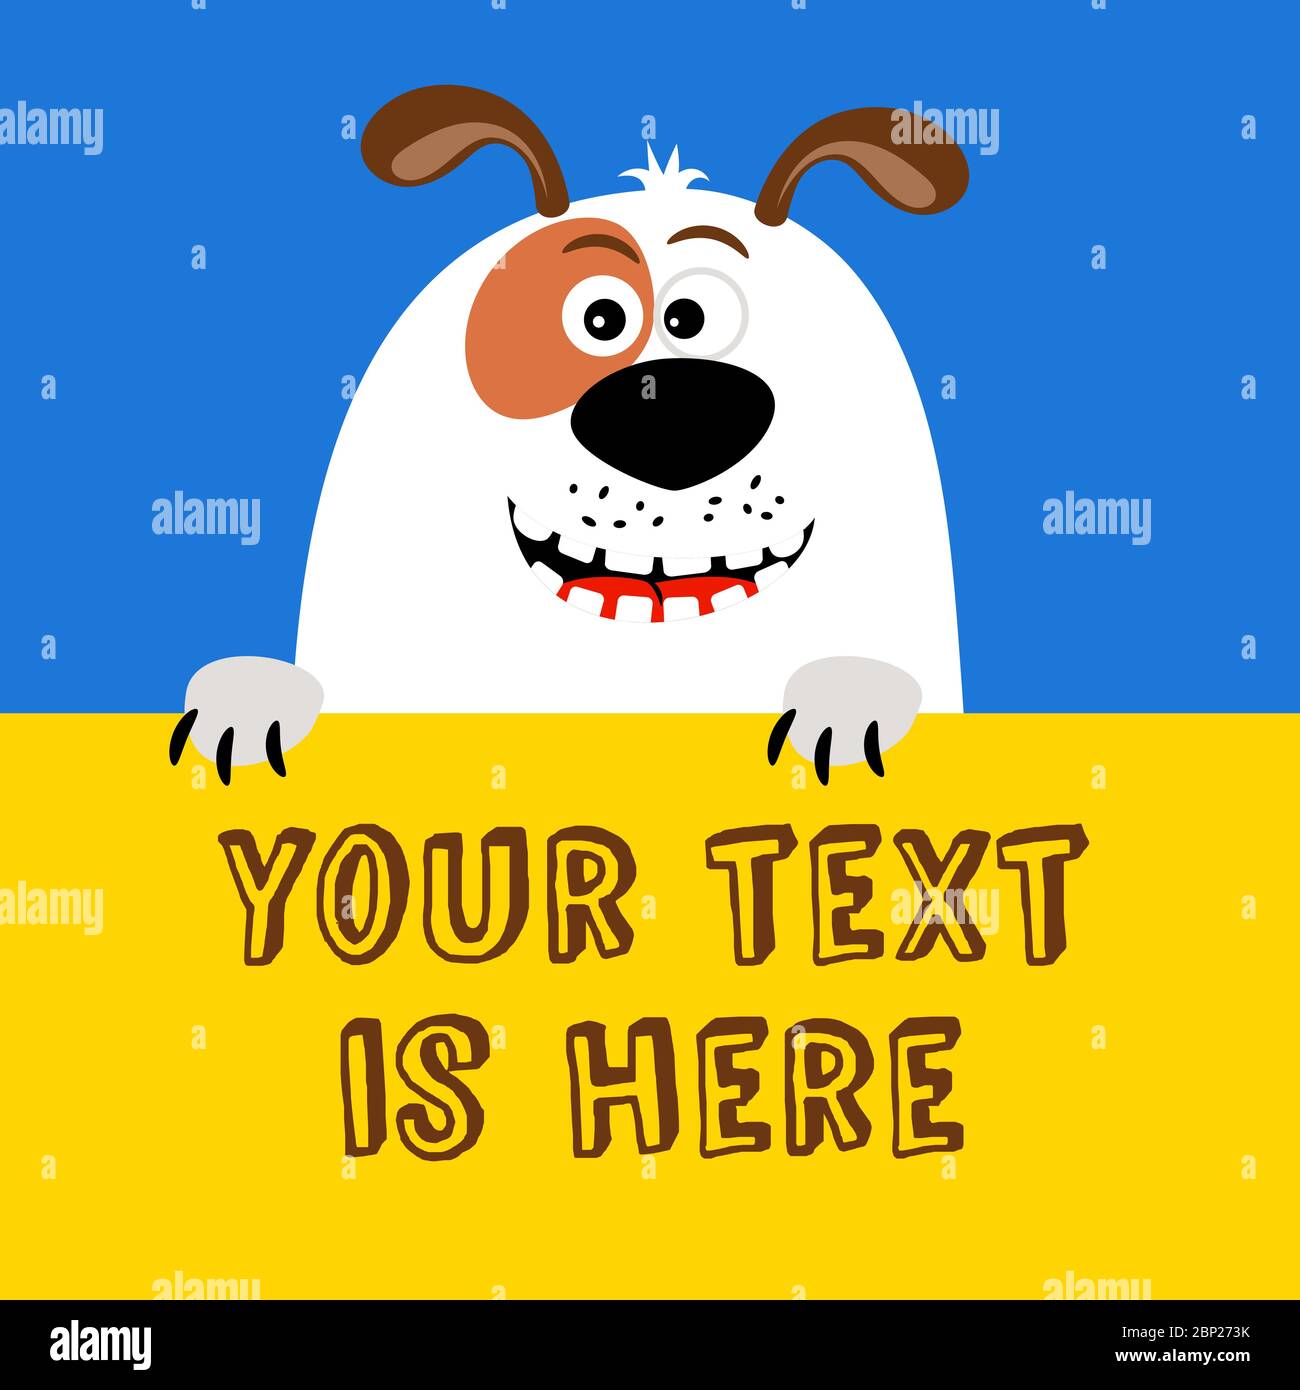 Greeting card with funny cartoon dog and place for text, vector illustration Stock Vector